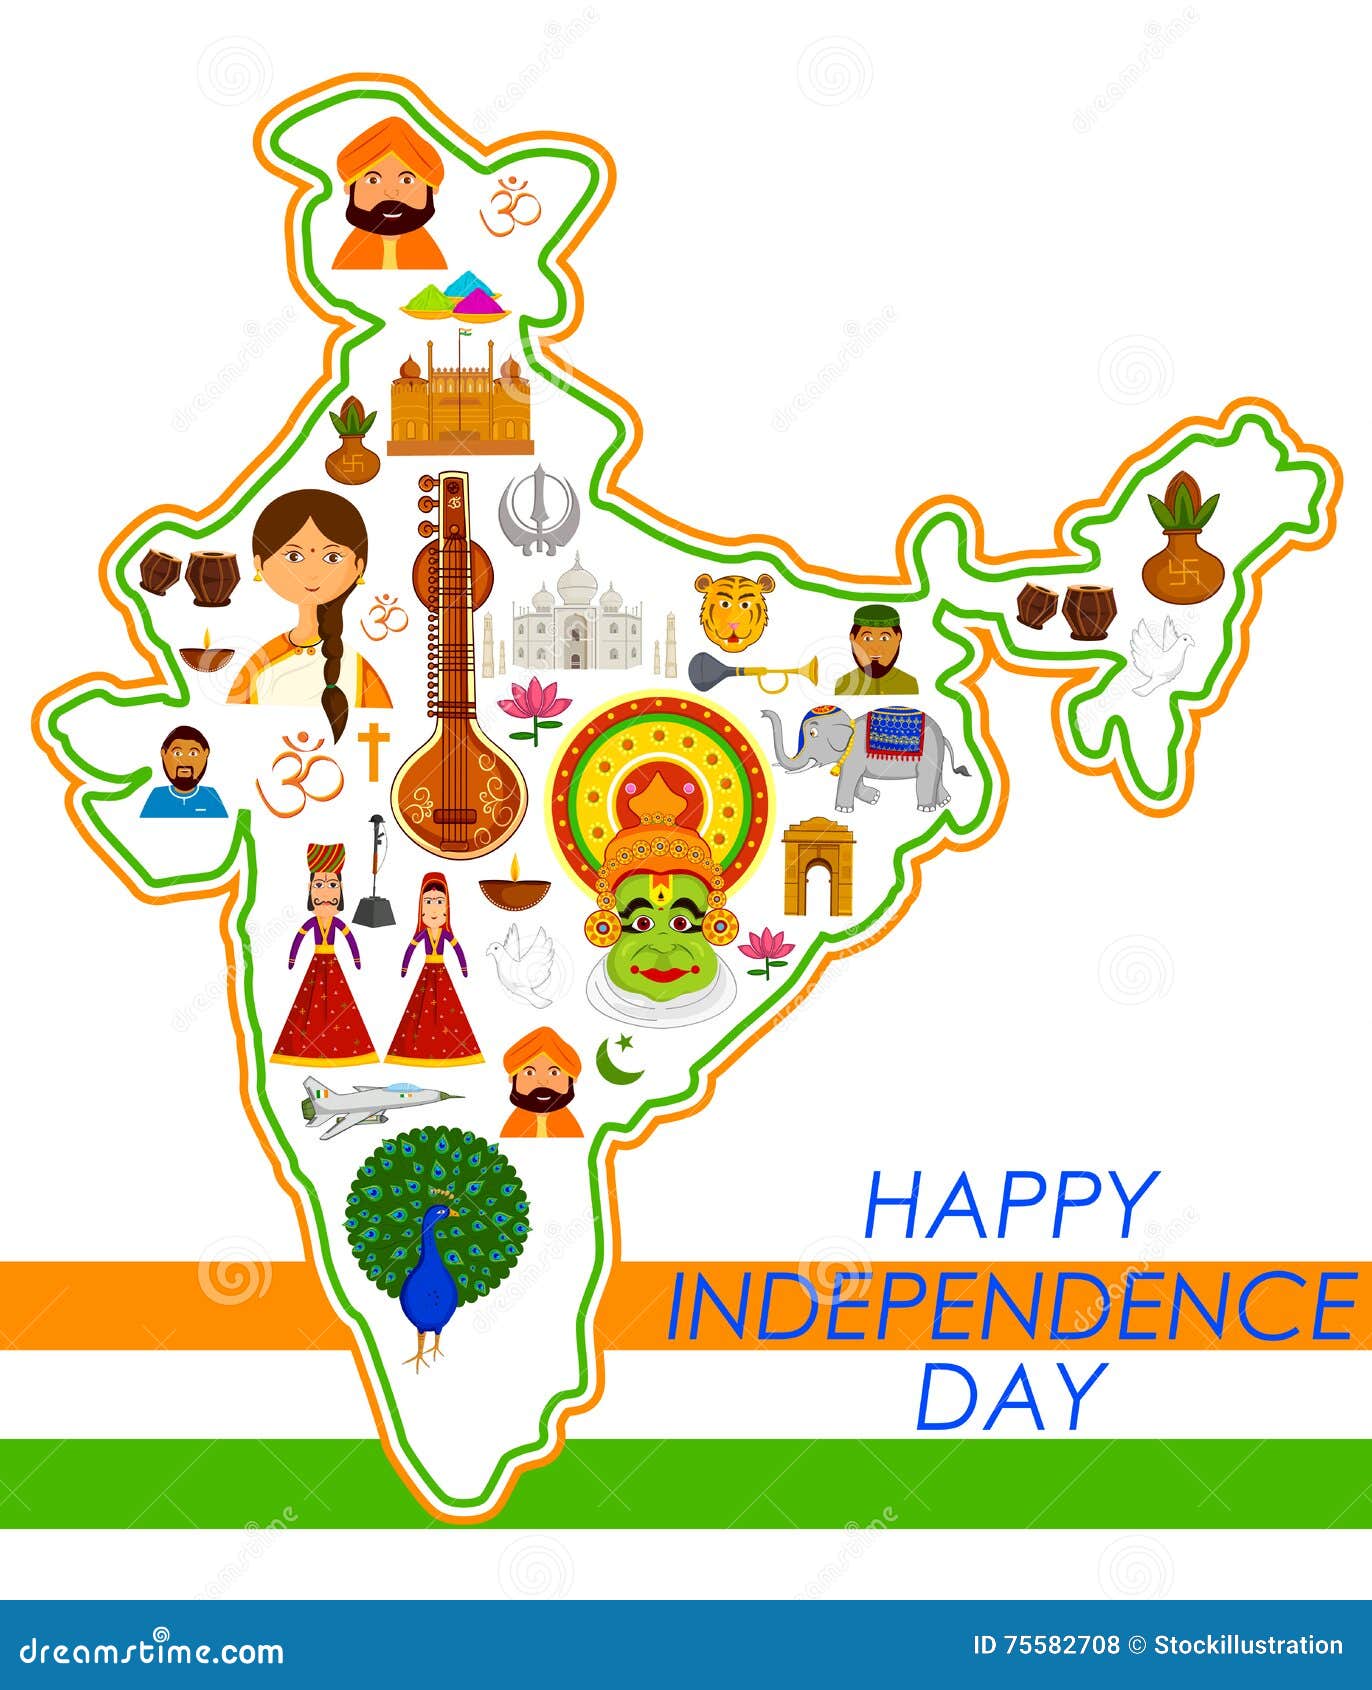 Happy Independence Day of India Stock Vector - Illustration of hinduism ...